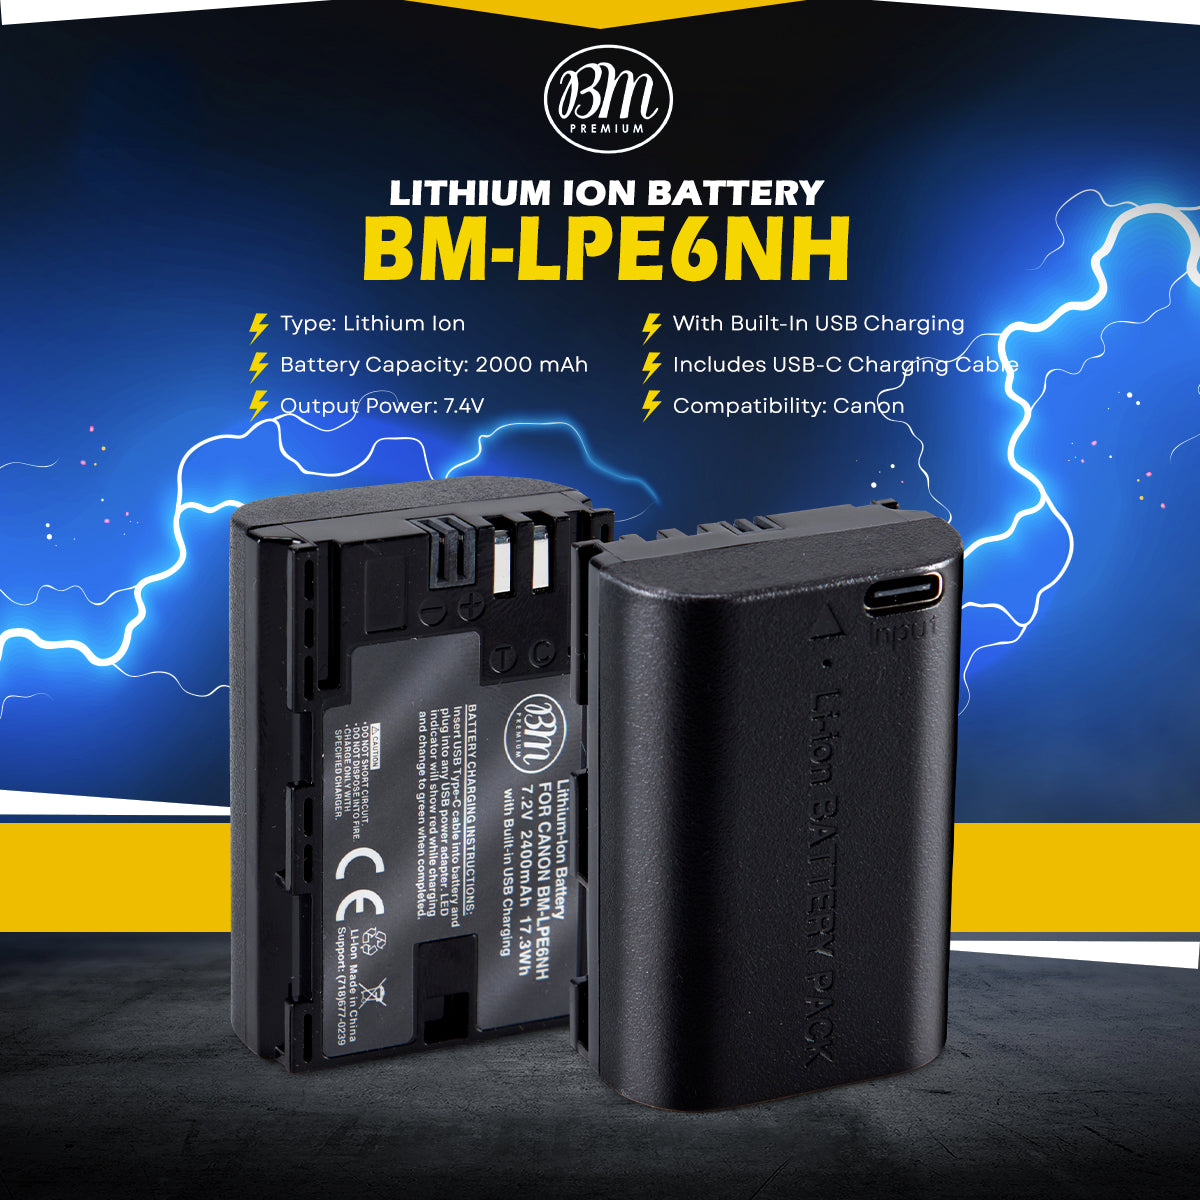 BM Premium LP-E6NH Battery with Built-in USB-C Charging Port